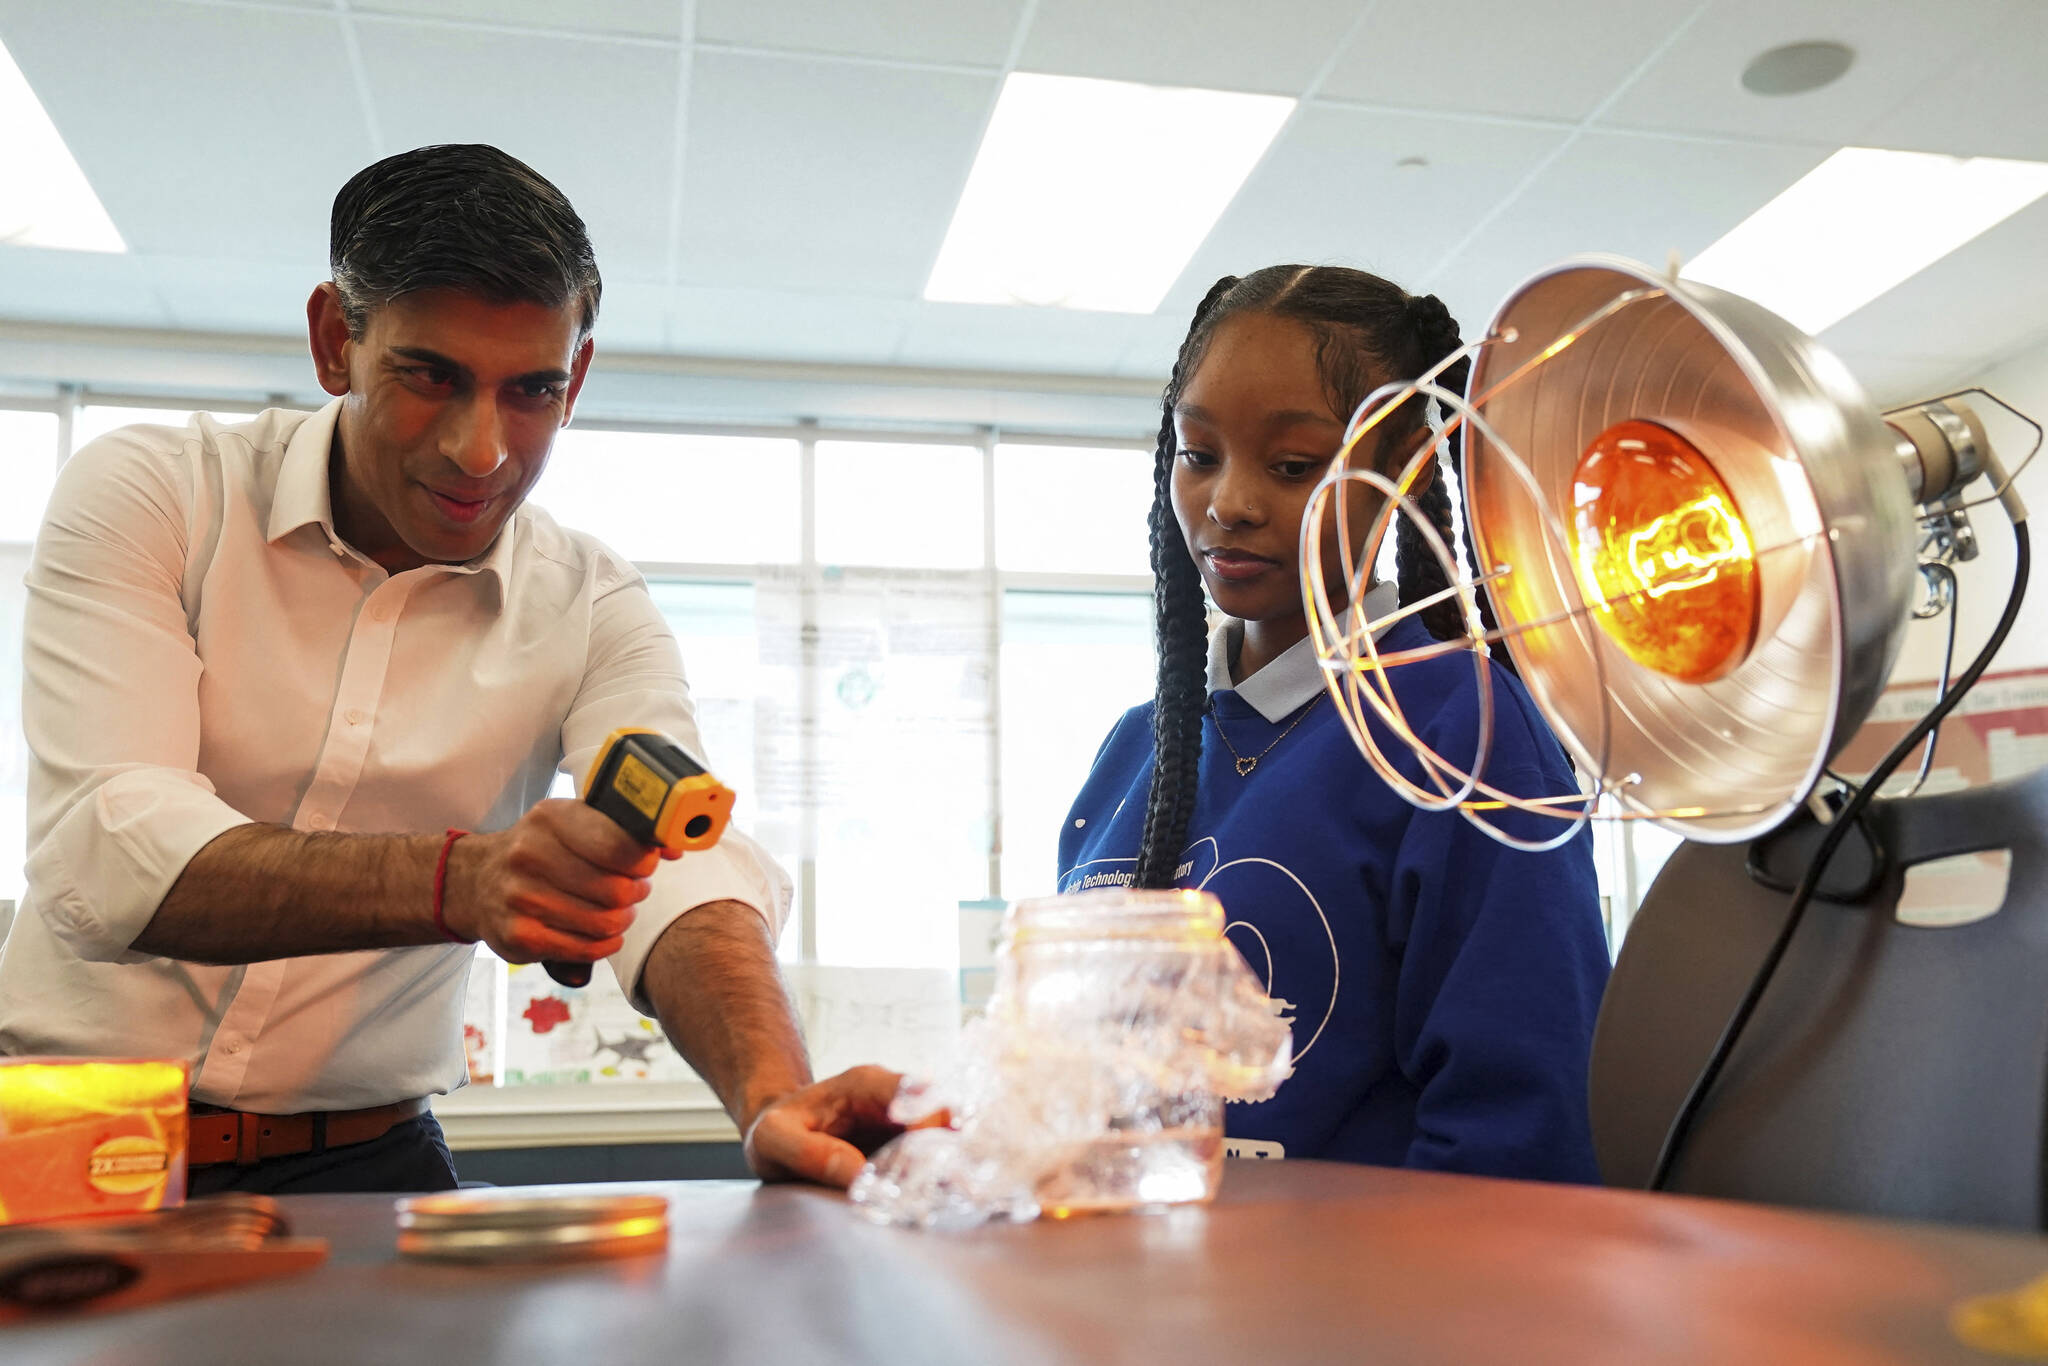 British Prime Minister Rishi Sunak takes part in a science experiment as he visits the Friendship Technology Preparatory High School during his trip to Washington, DC, Wednesday, June 7, 2023. (Kevin Lamarque/Pool Photo via AP)